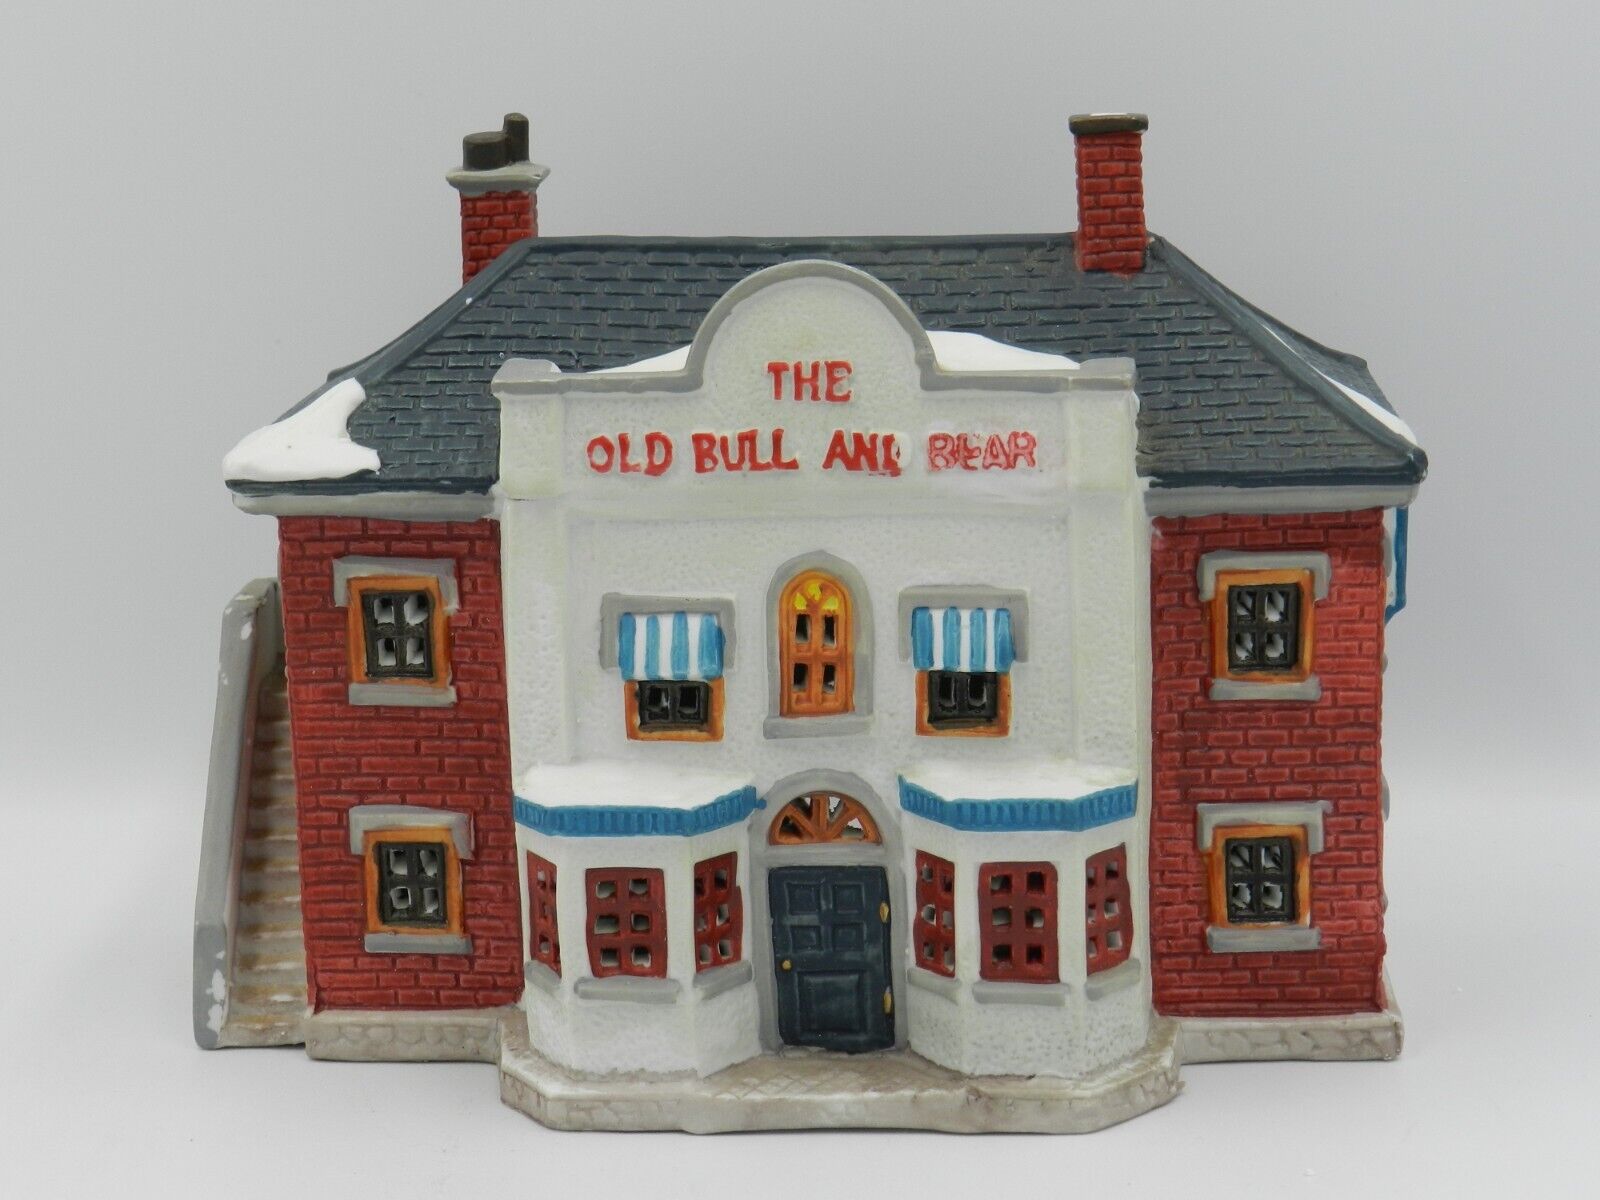  Lemax 1994 The Old Bull And Bear #45119 Lighted Christmas Village Tavern